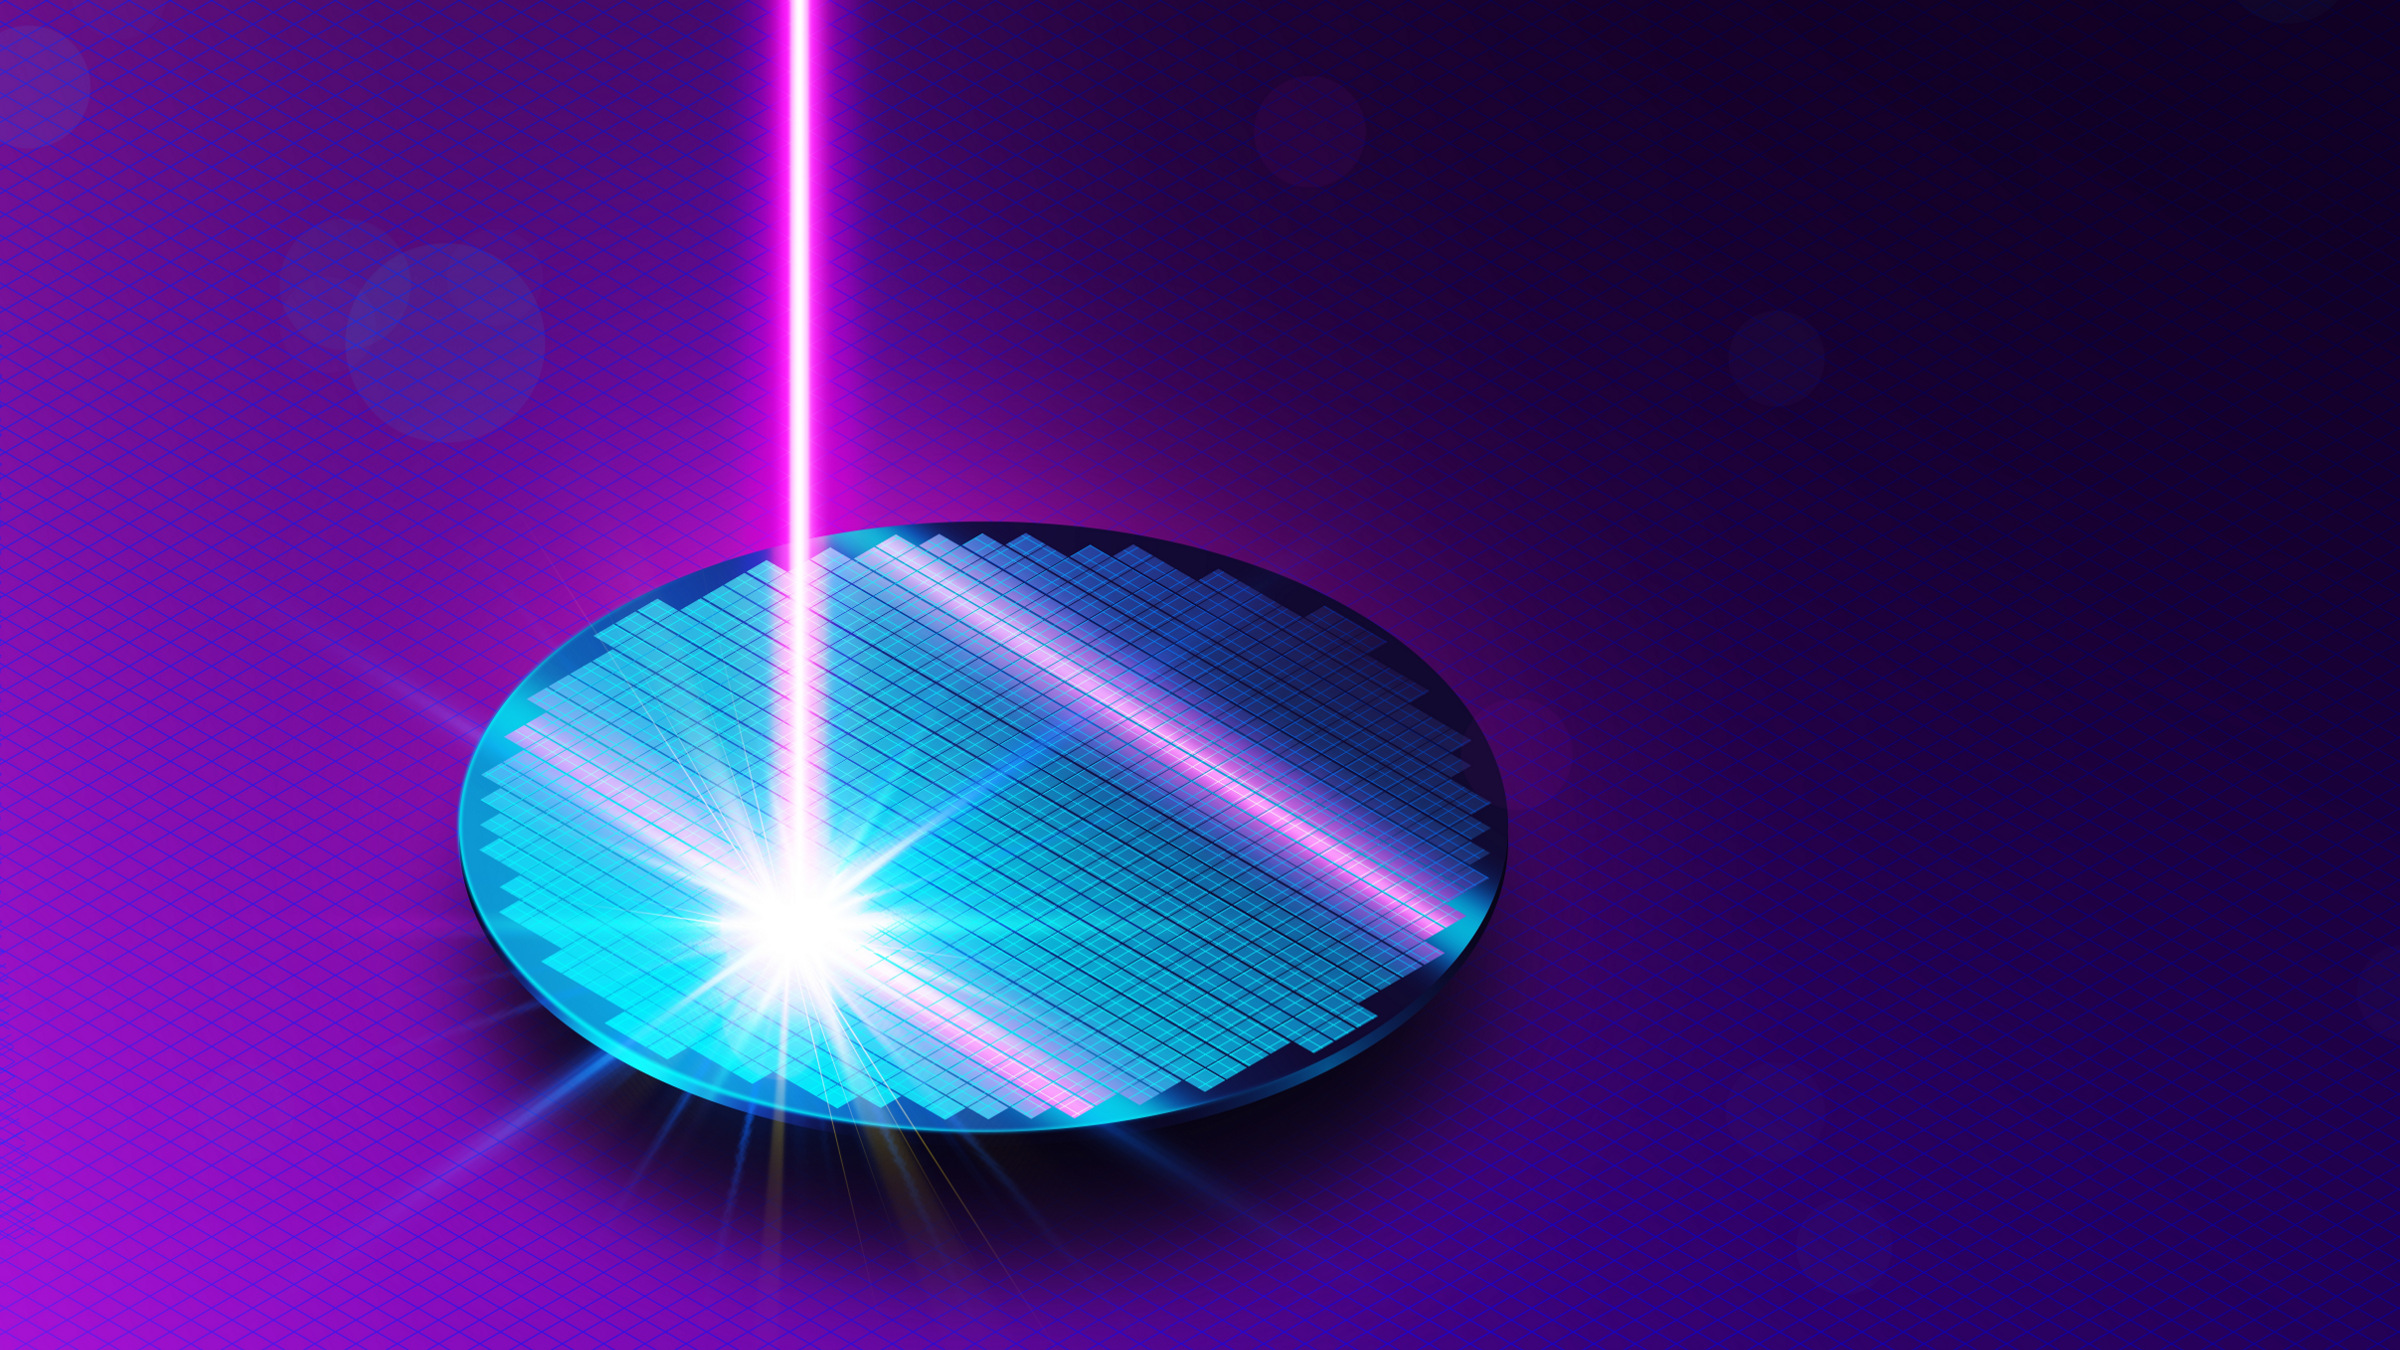 laser pulse projected onto a silicon wafer, illustration